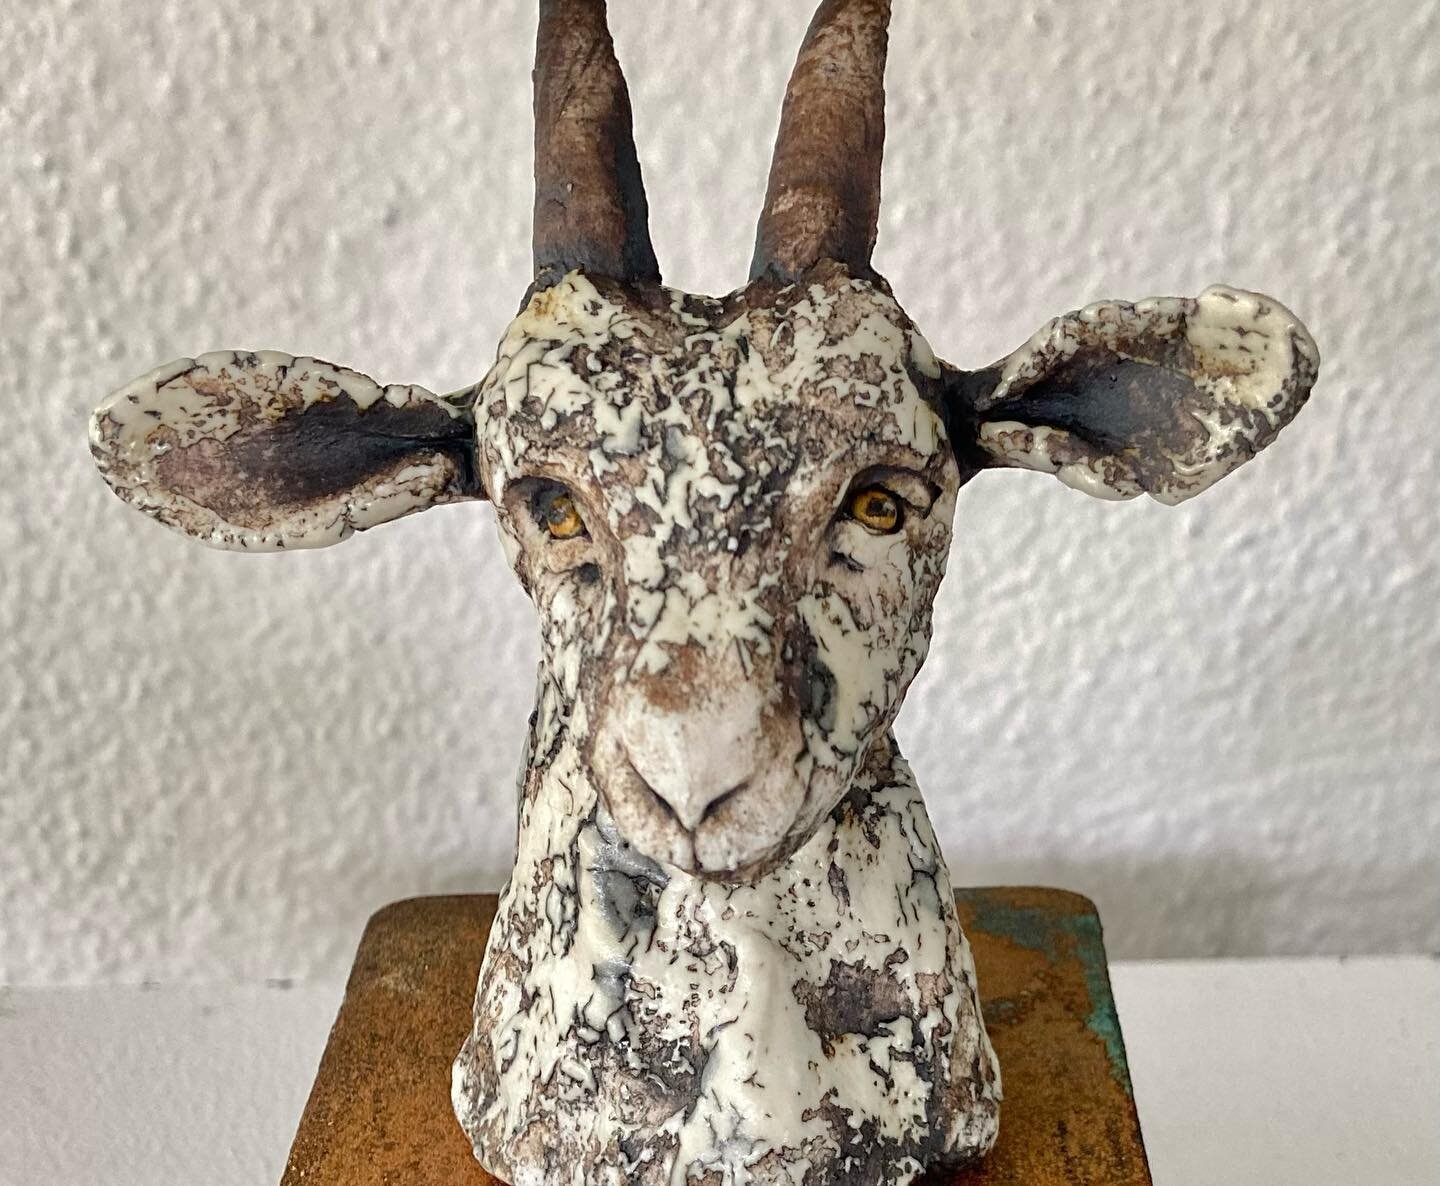 You can get quite attached to these animals as they appear before you in this wonderful porcelain clay! But I can&rsquo;t make more if I keep them all 😁so I&rsquo;ve just delivered my gentle goat to Wunderkammer in Melbourne, the most fascinating sh